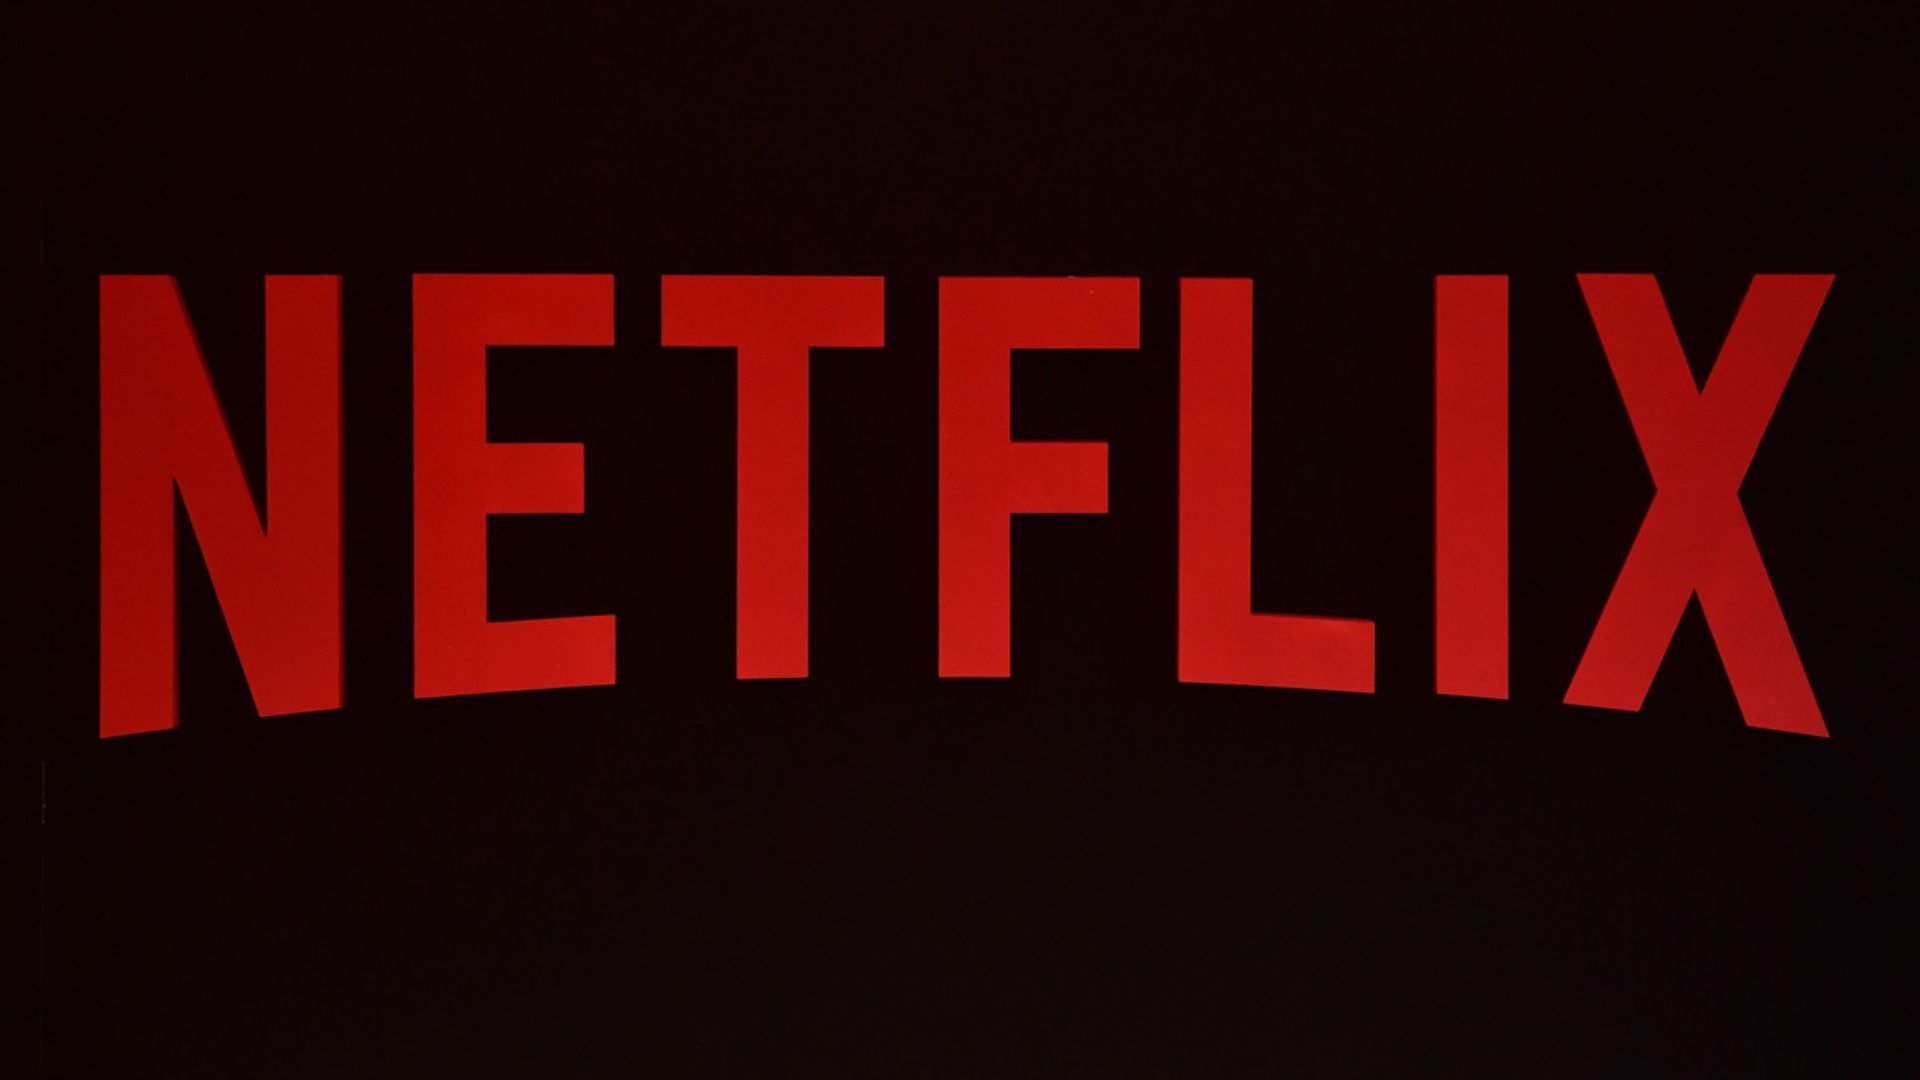 Social distancing doesn't mean you have to watch it alone — Netflix